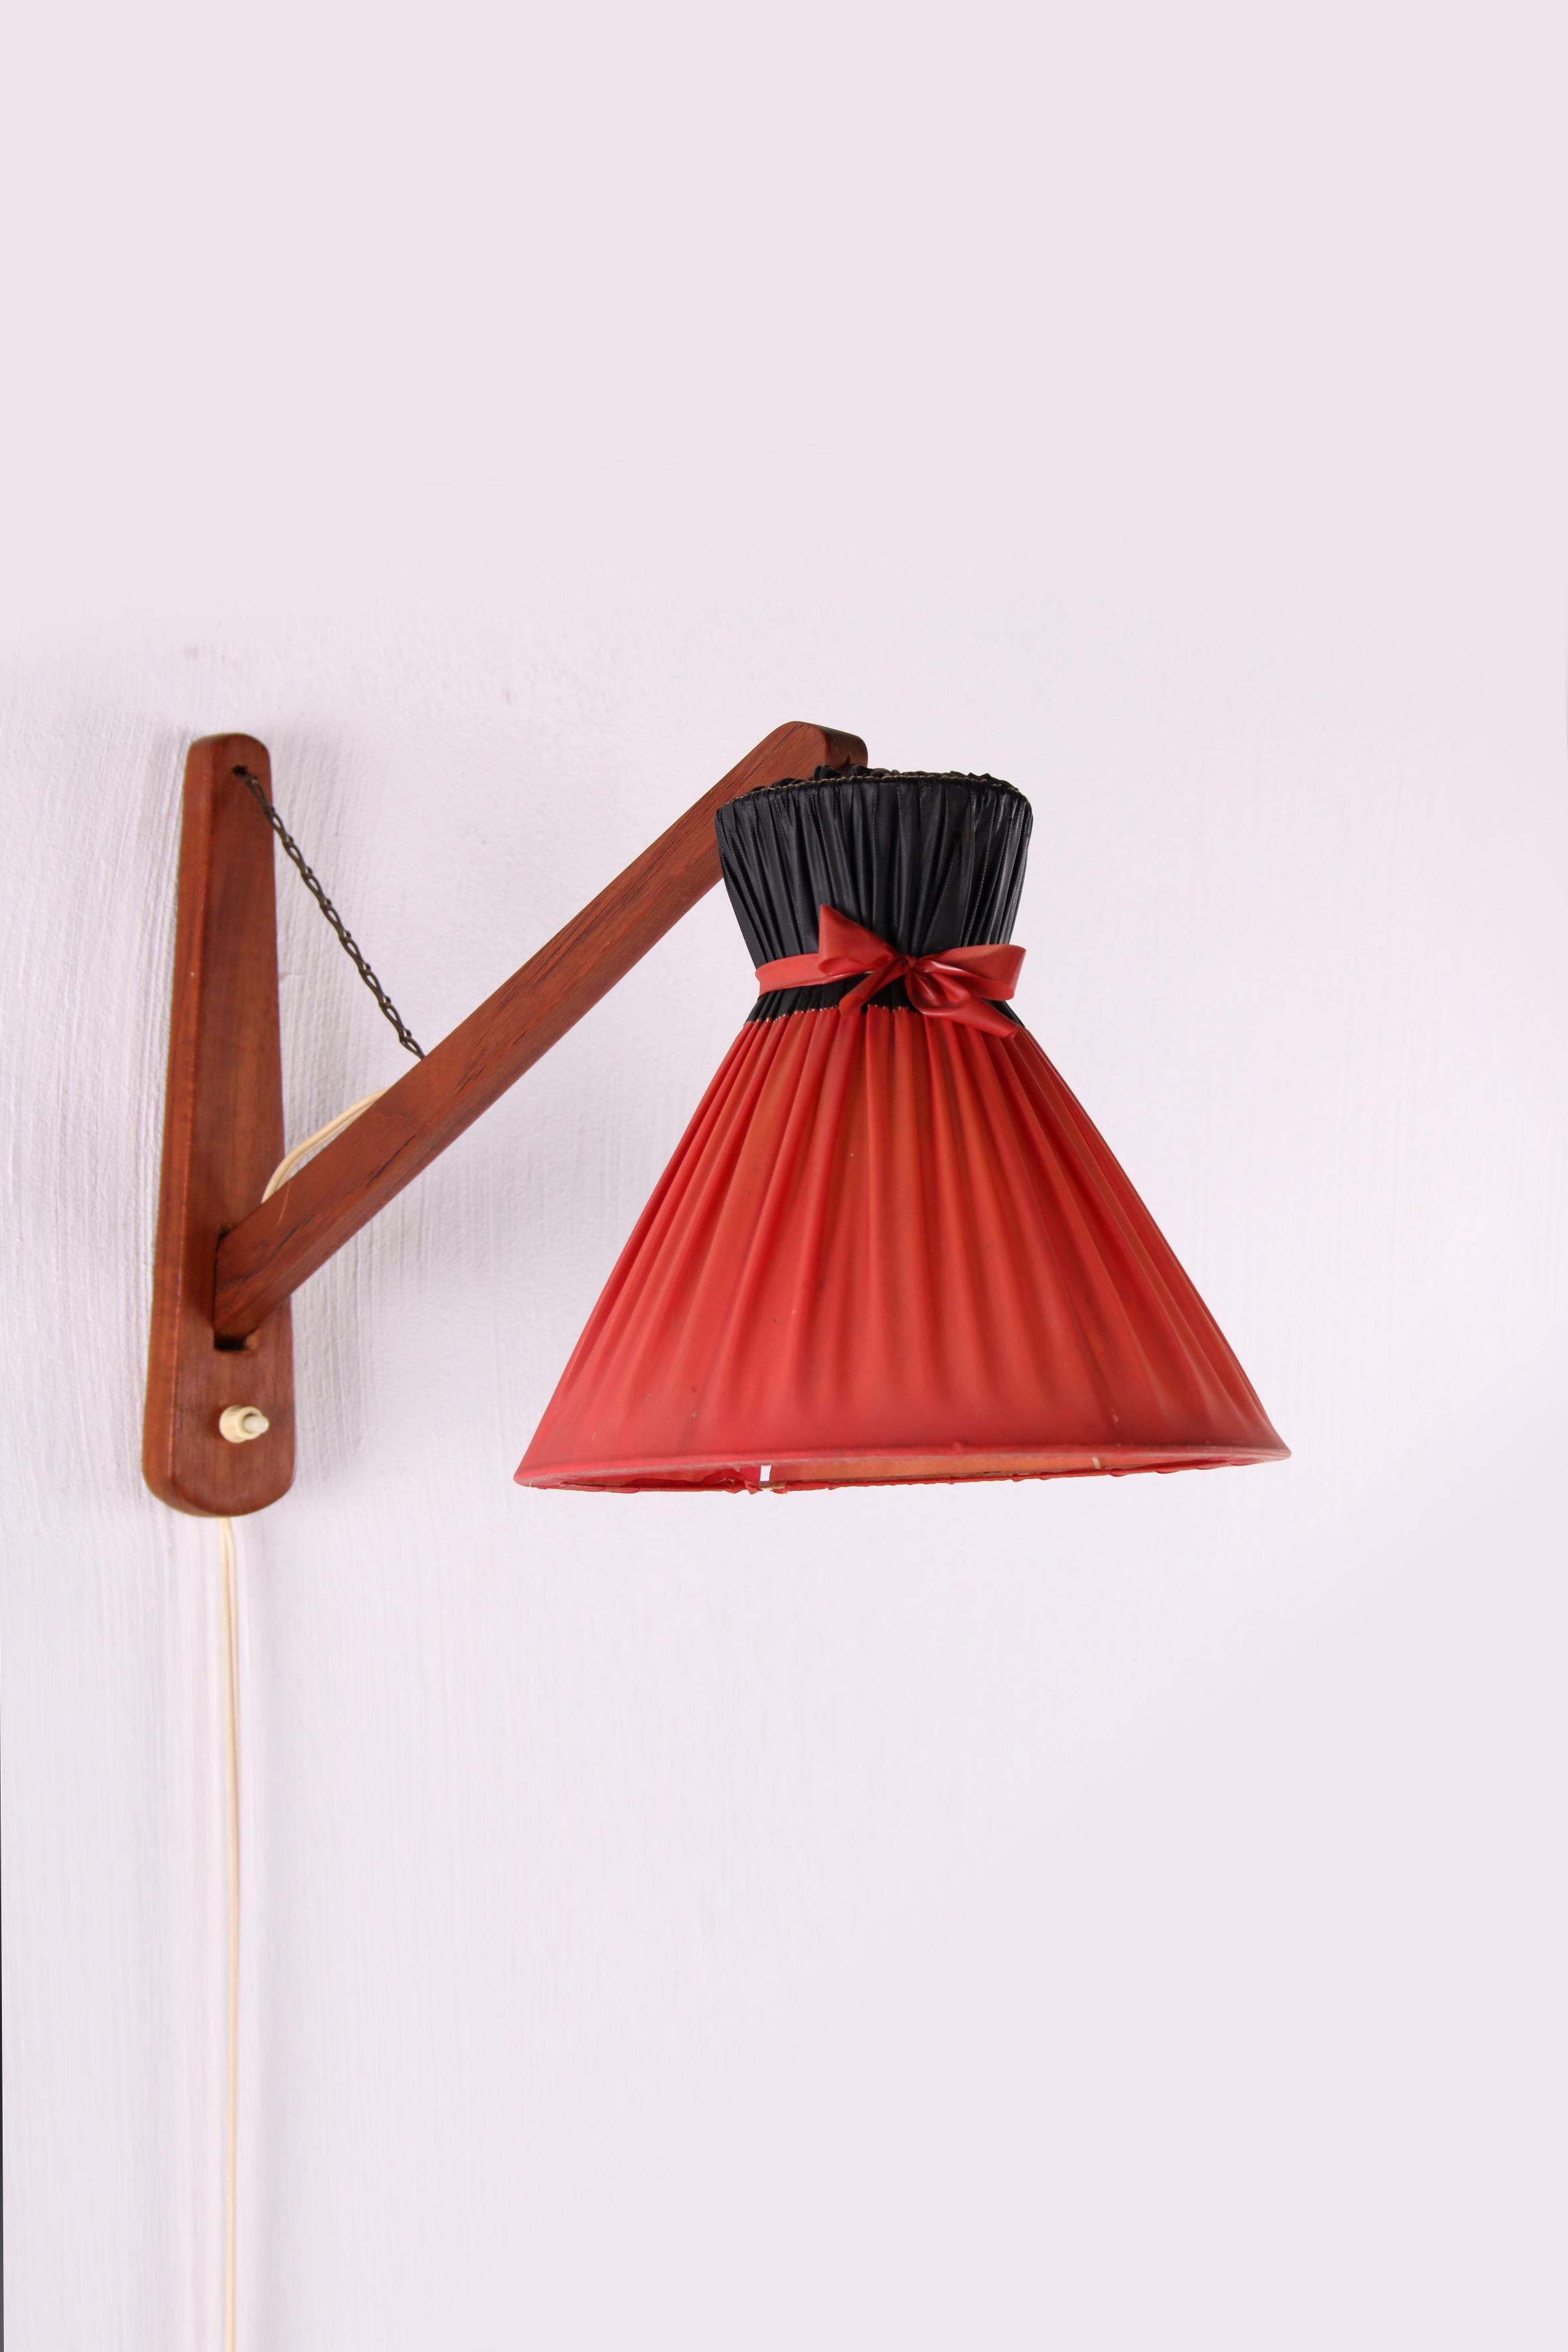 Danish Design Wall Lamp with Original Shade, 1960s For Sale 8